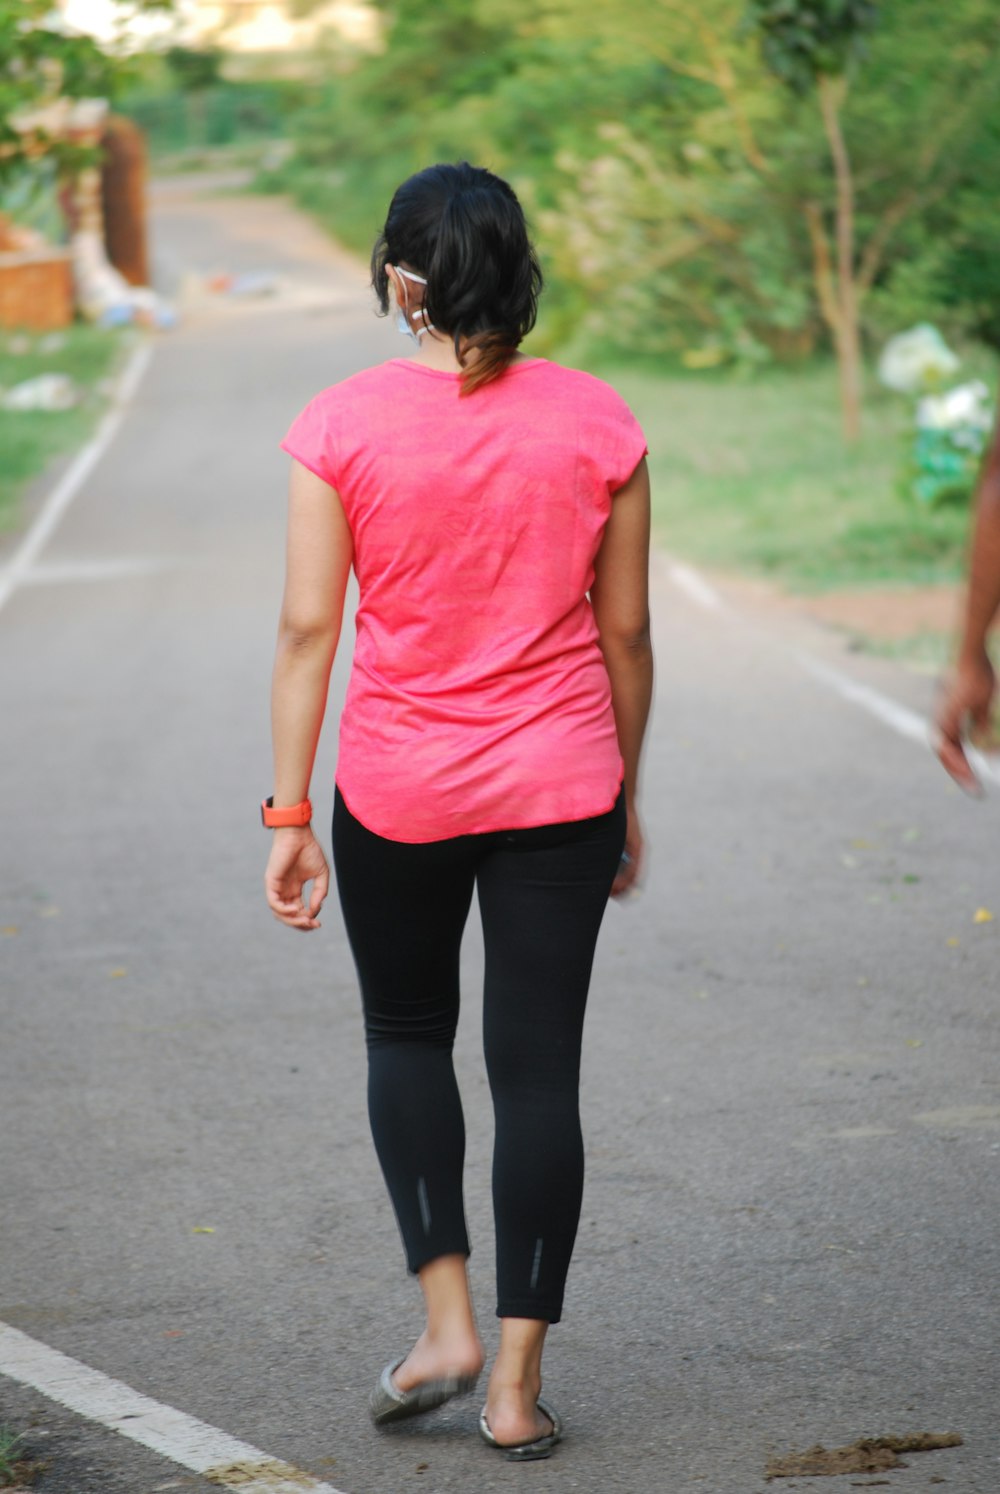 woman in red tank top and black leggings walking on road during daytime  photo – Free Person Image on Unsplash